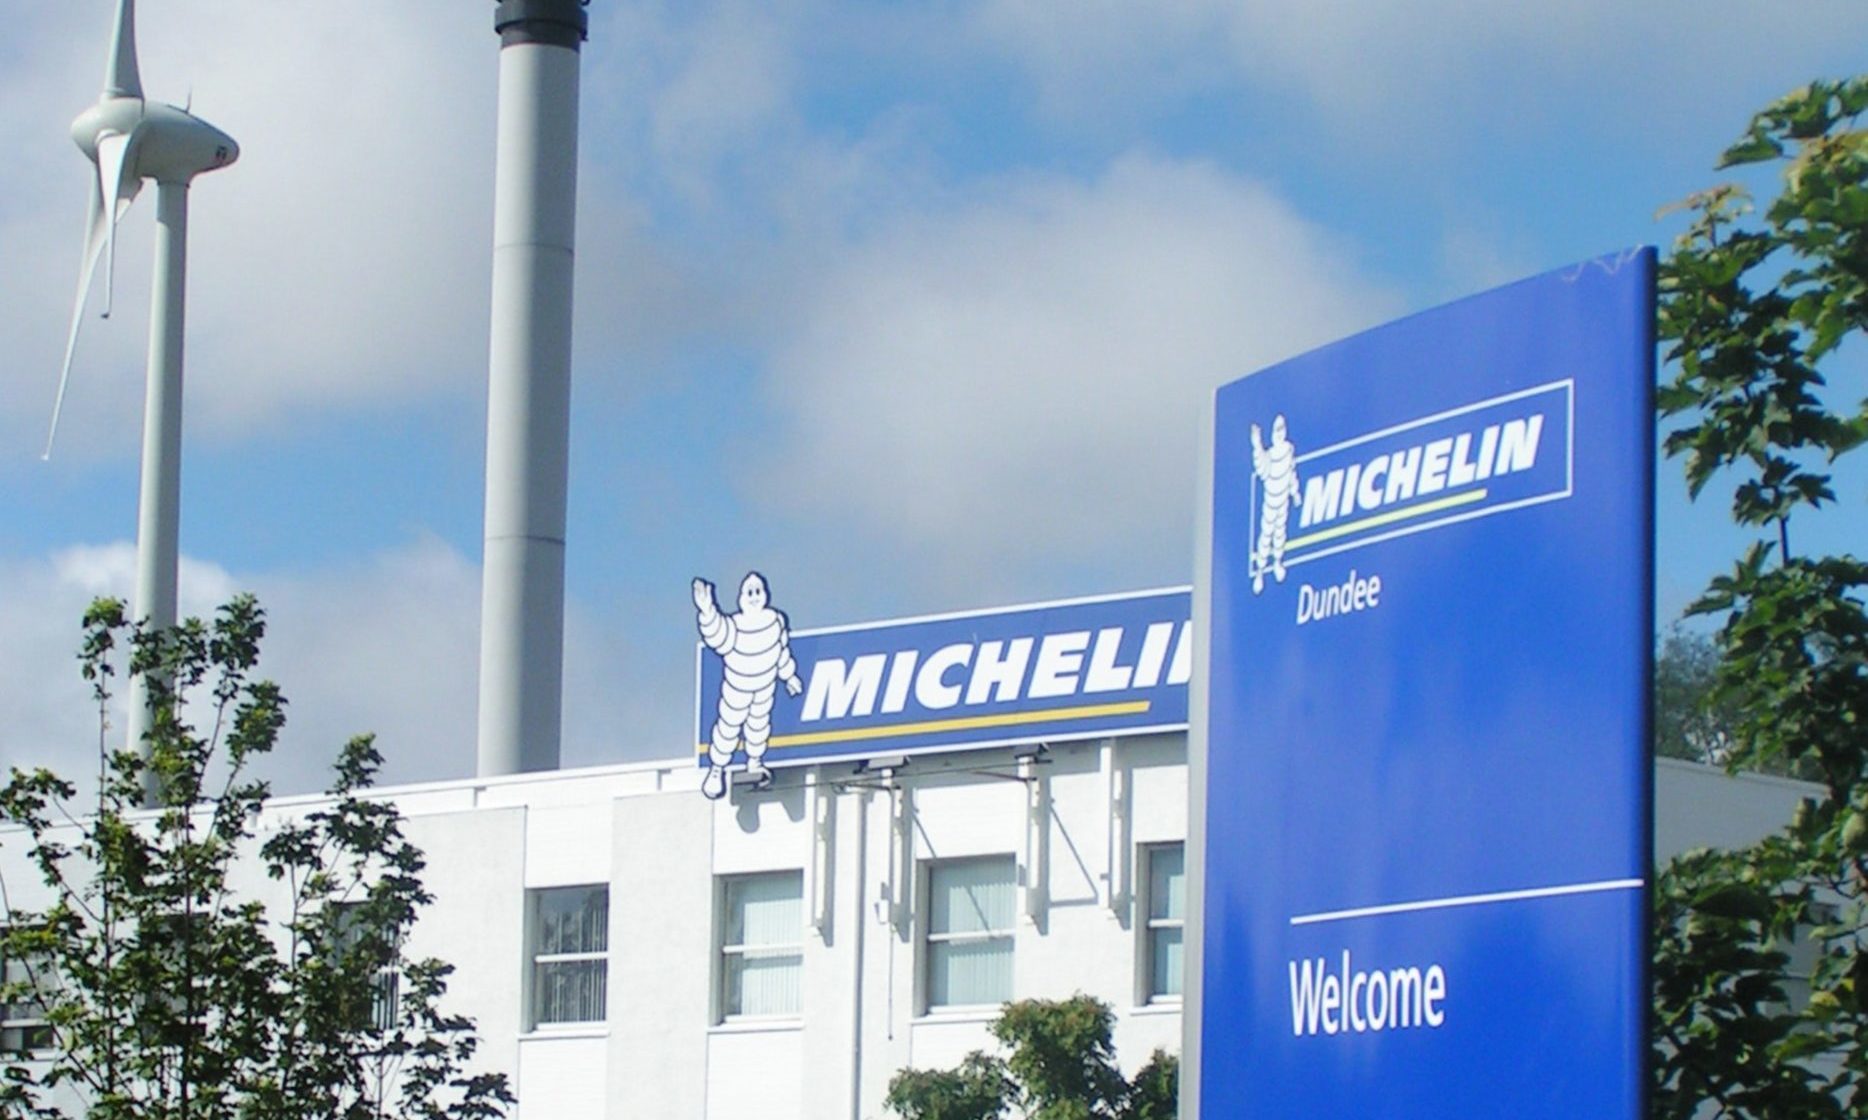 The Michelin site in Dundee.